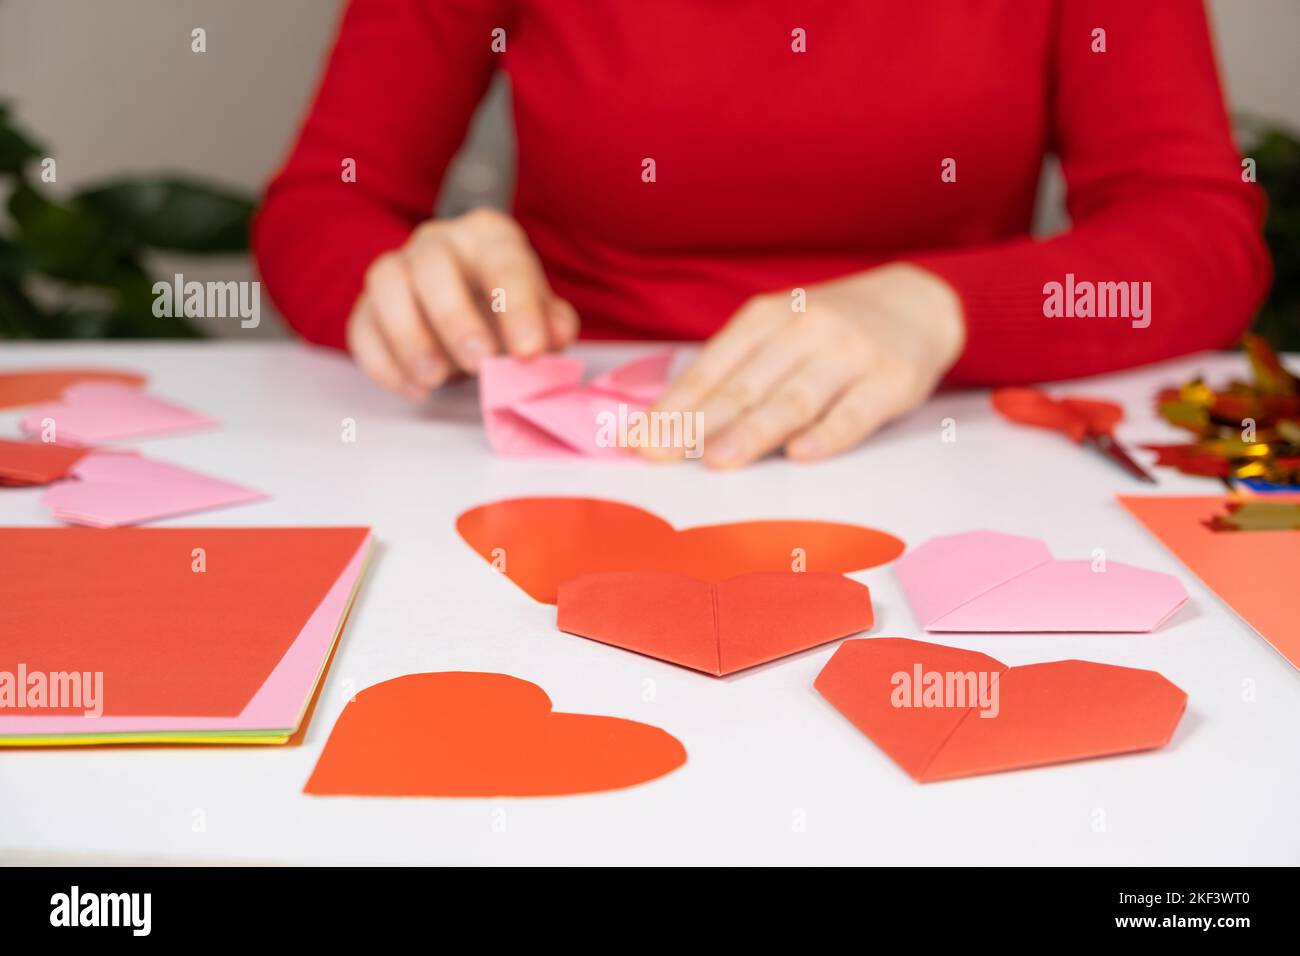 Making origami hearts for Valentine's Day. Crafts made of paper with your own hands. Stock Photo